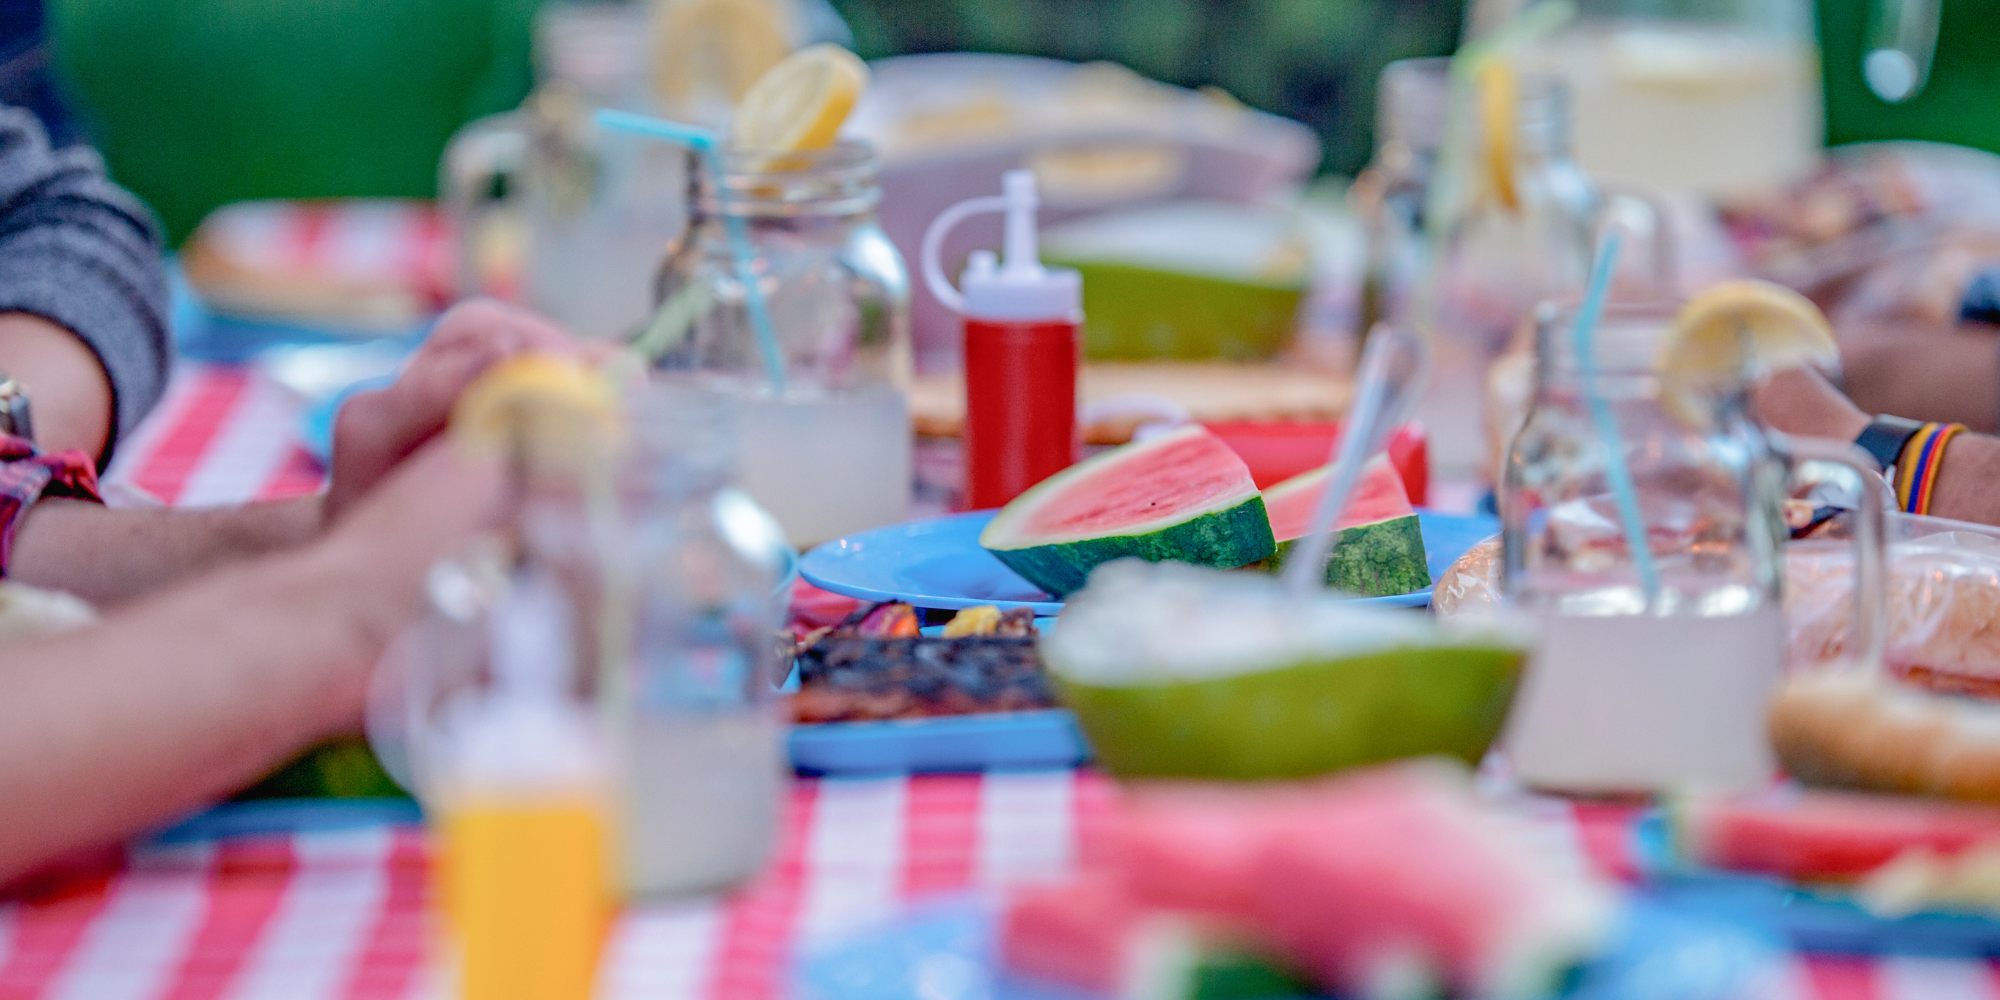 Table at a family cookout/barbeque. The table has a red and white checkered tablecloth, blue plates, watermelon, some grilled vegetables, mason jars filled with lemonade and a catchup bottle in the distance.  